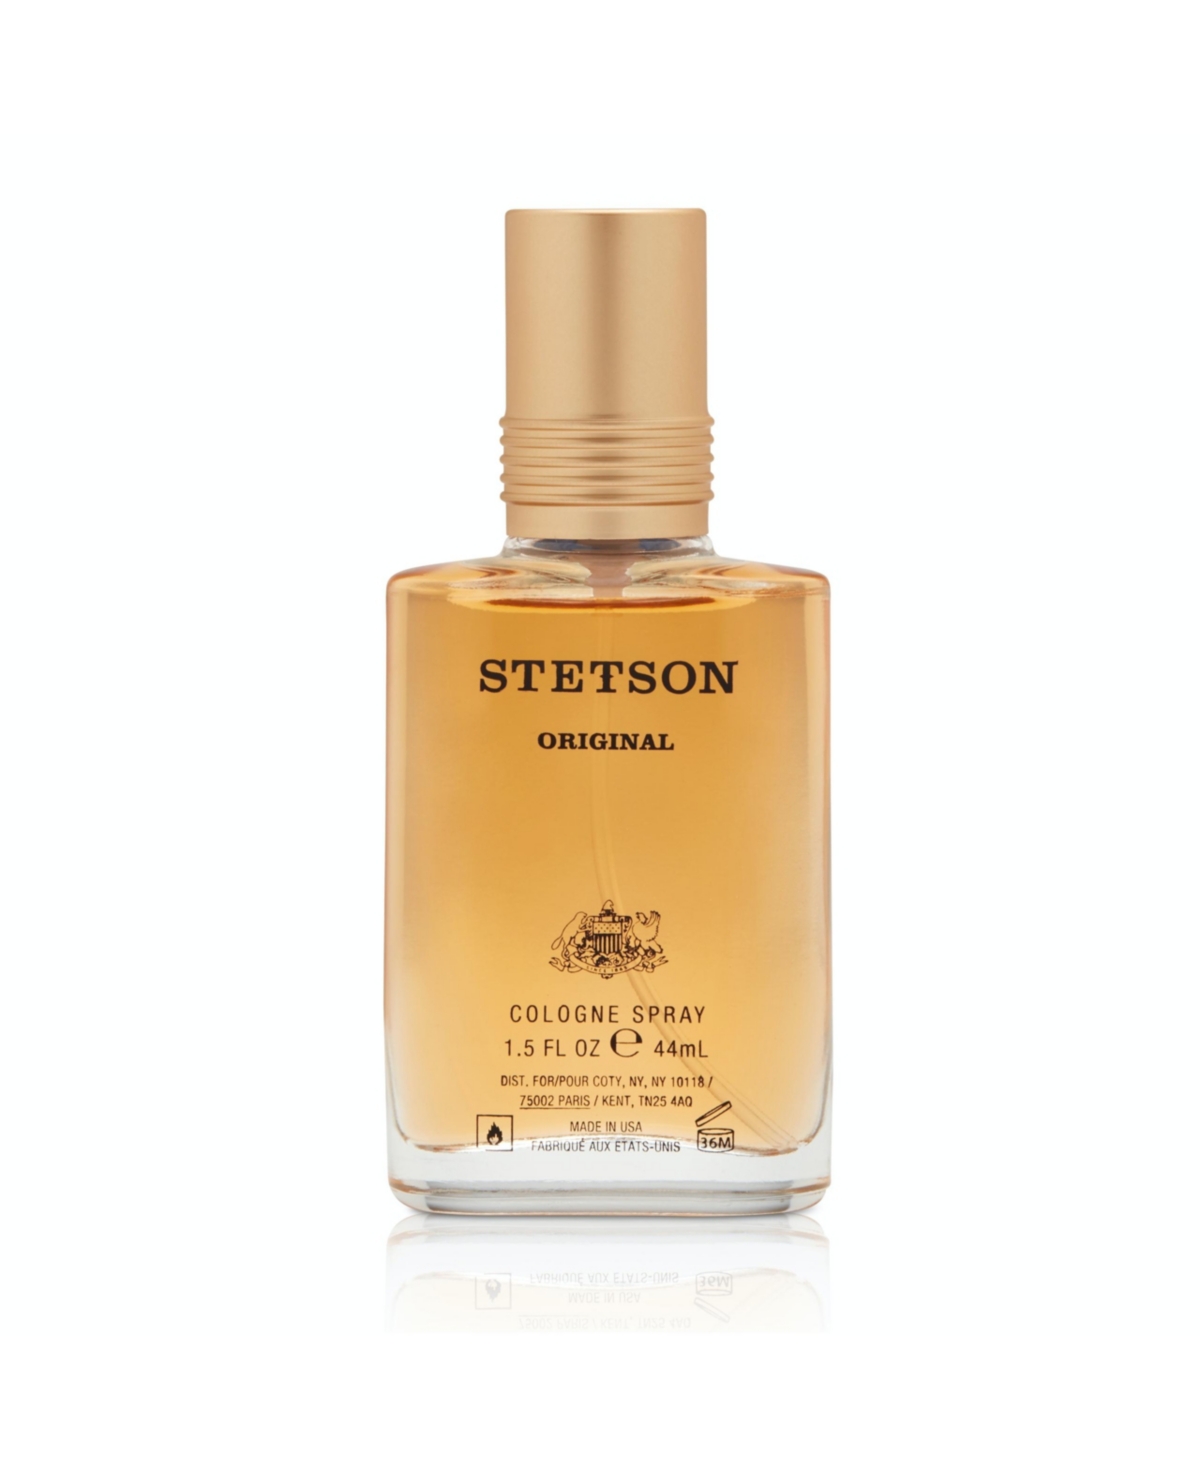 Stetson Original by Scent Beauty - Cologne for Men - Classic, Woody and Masculine Aroma with Fragrance Notes of Citrus, Patchouli, and Tonka Bean - 1.